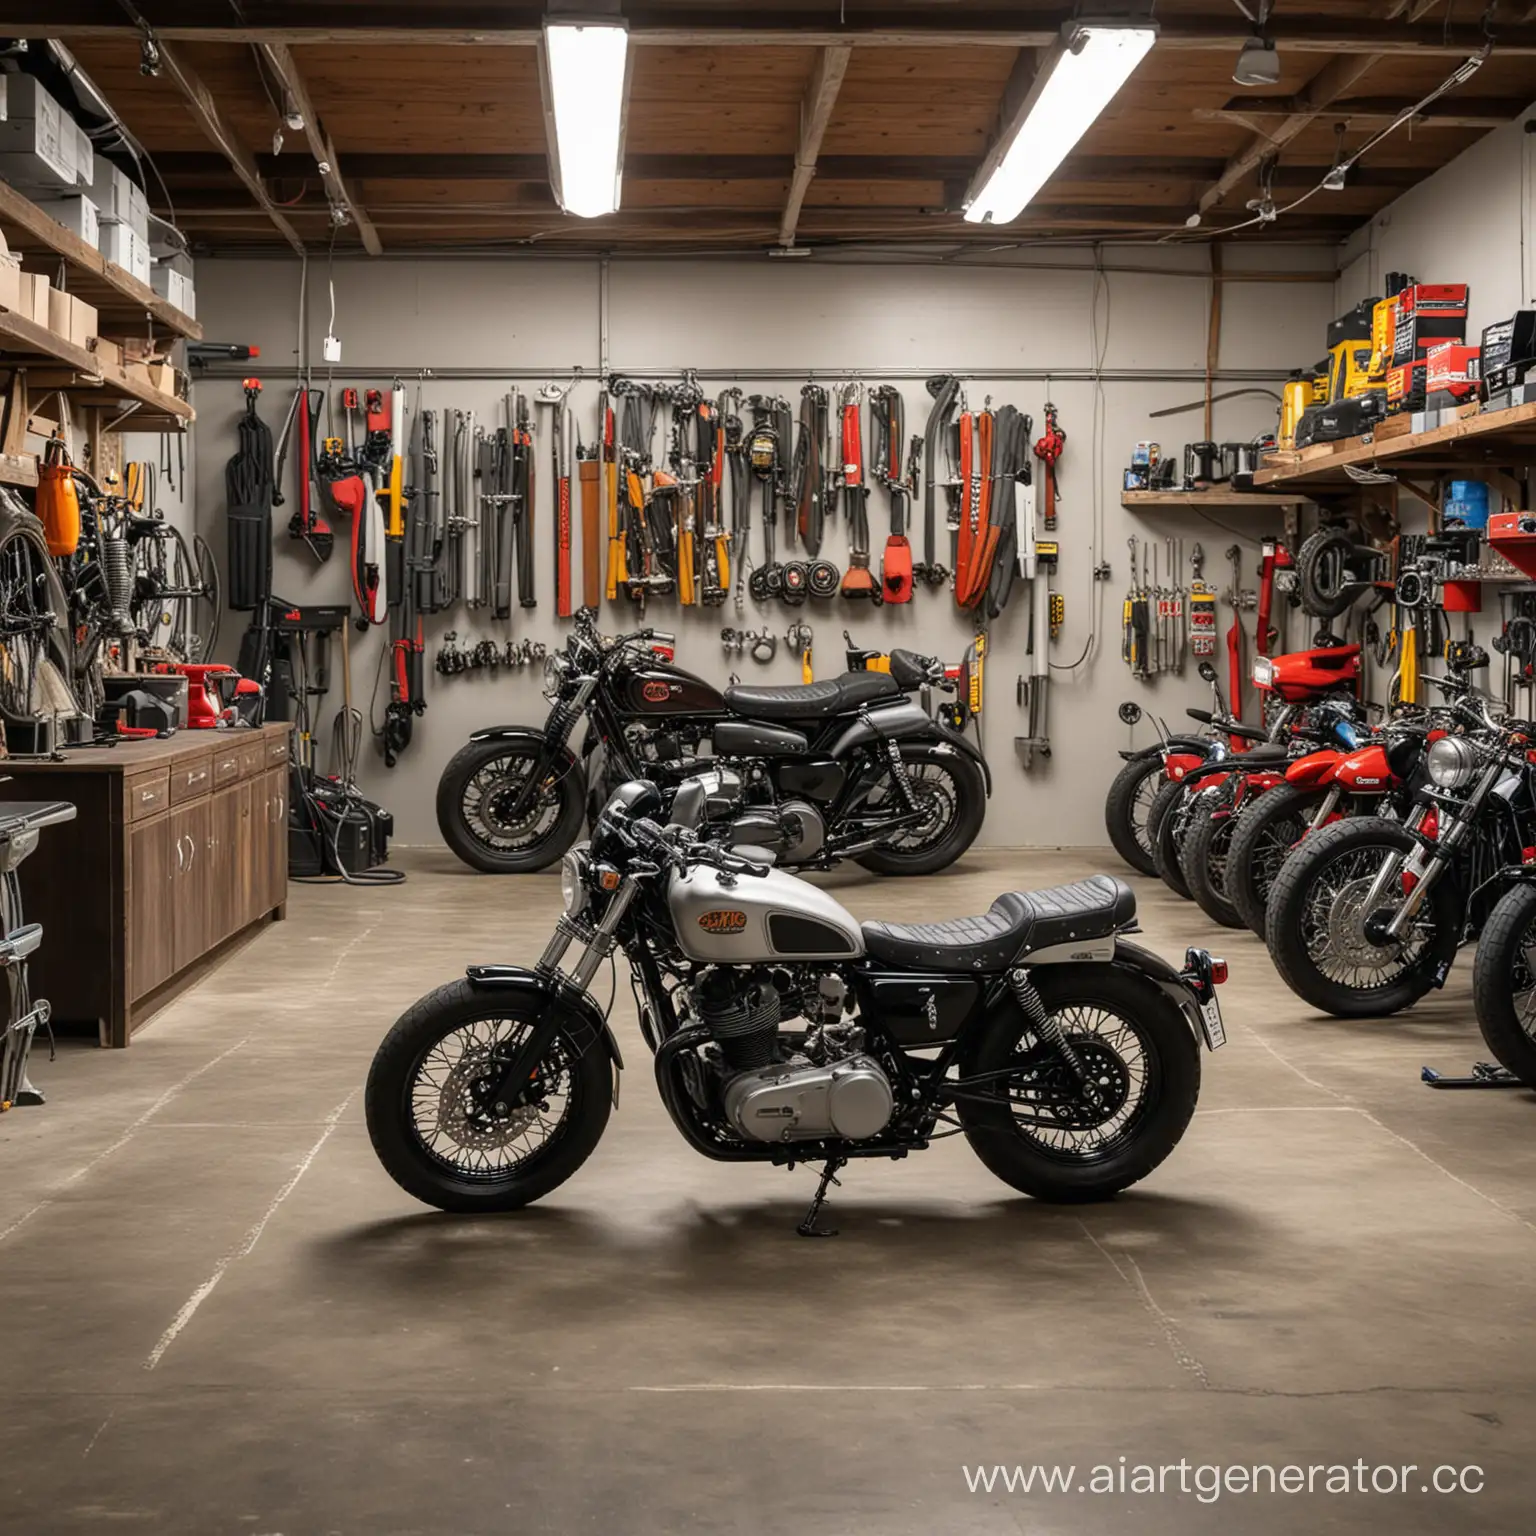 Vibrant-Motorcycle-Garage-Workshop-with-Custom-Bikes-and-Tools